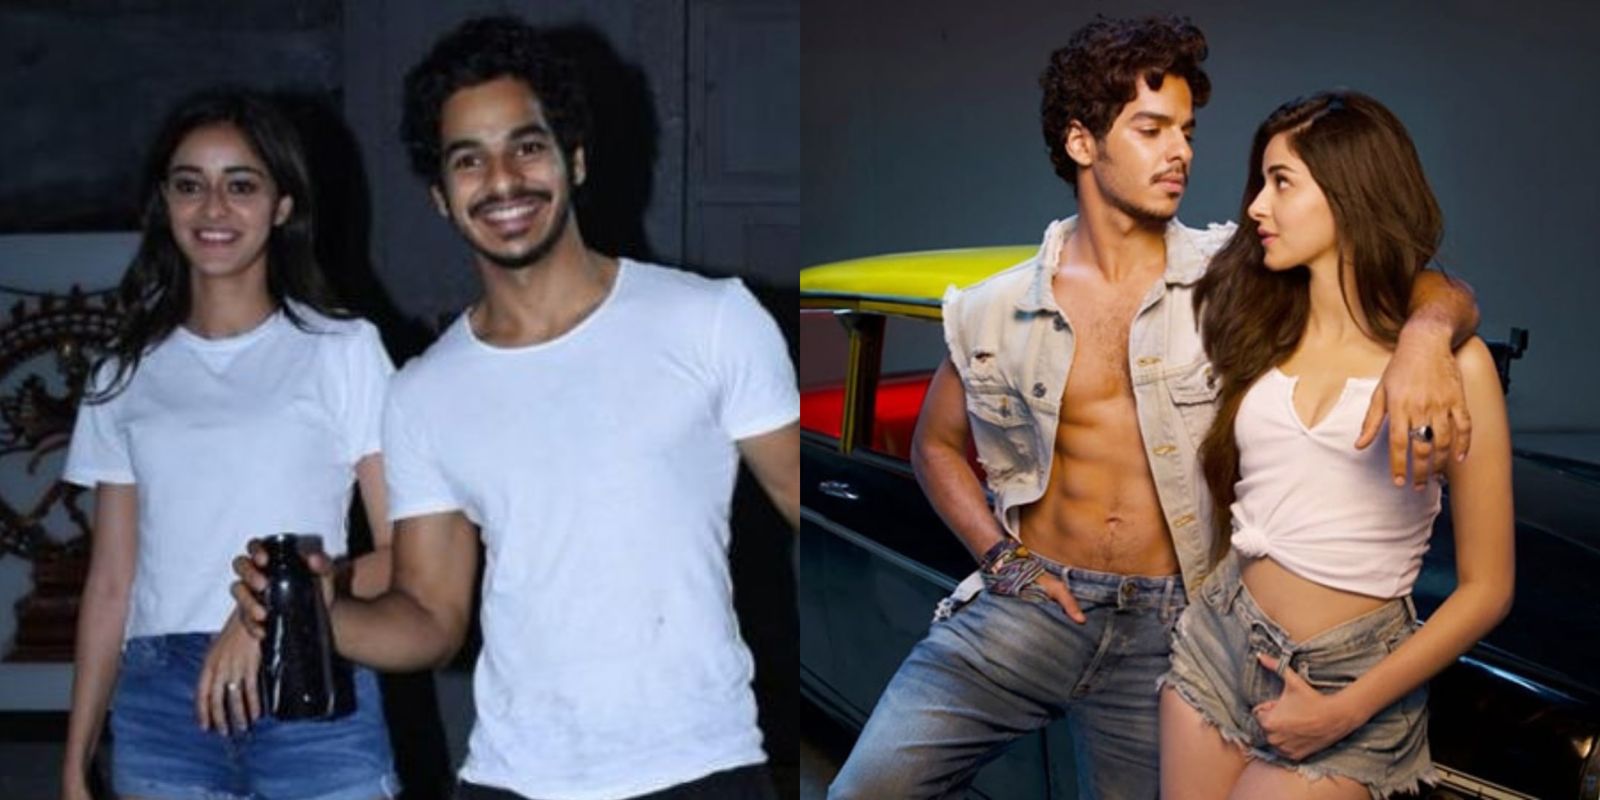 Ishaan Khatter On His Film With Ananya Panday: “I Hope Khaali Peeli Has A Theatrical Release”